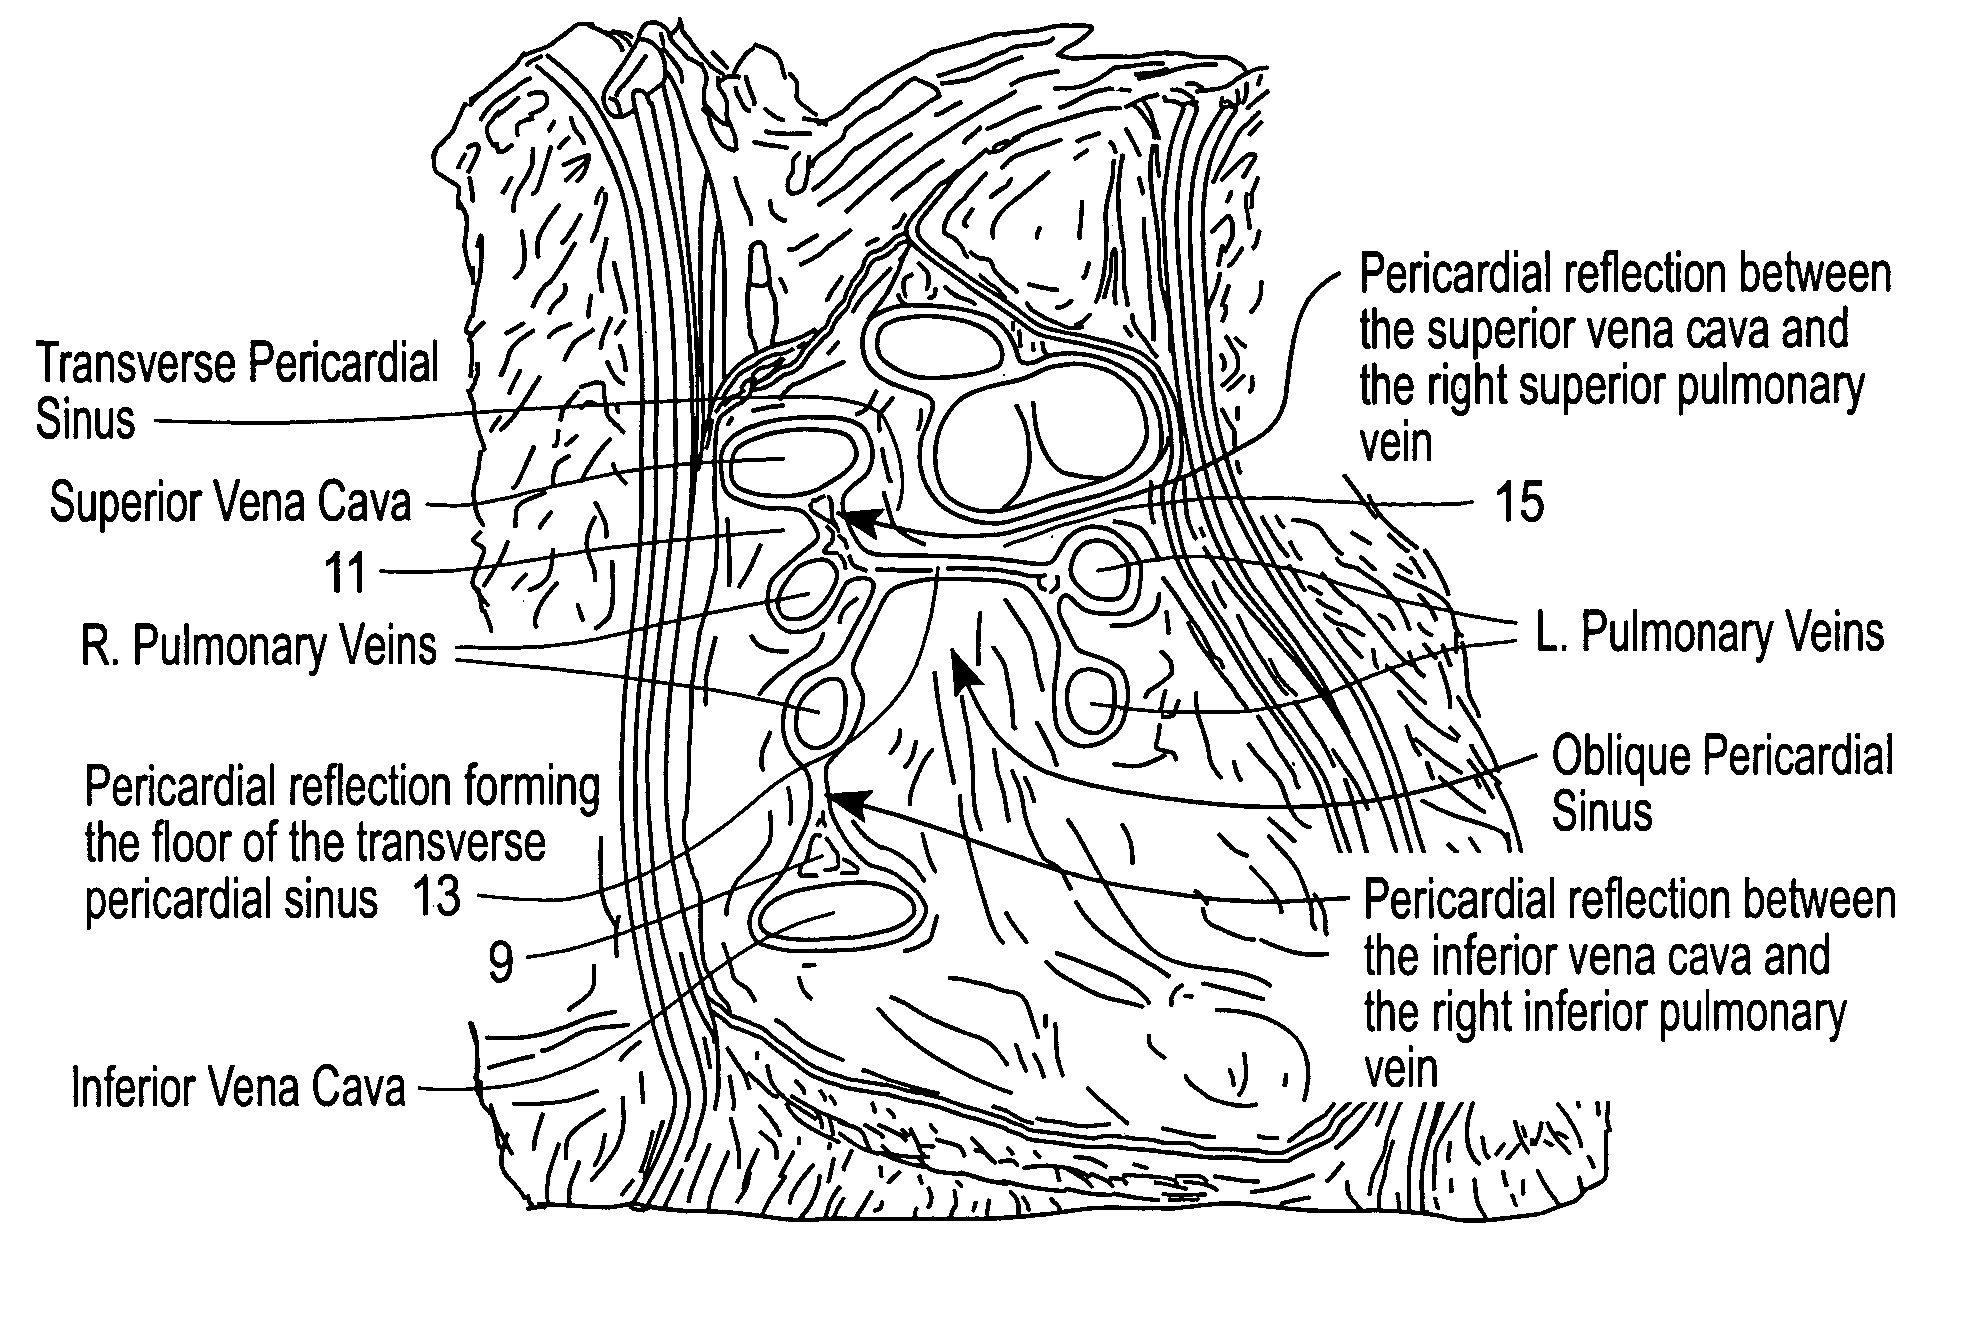 Apparatus and method for endoscopic encirclement of pulmonary veins for epicardial ablation